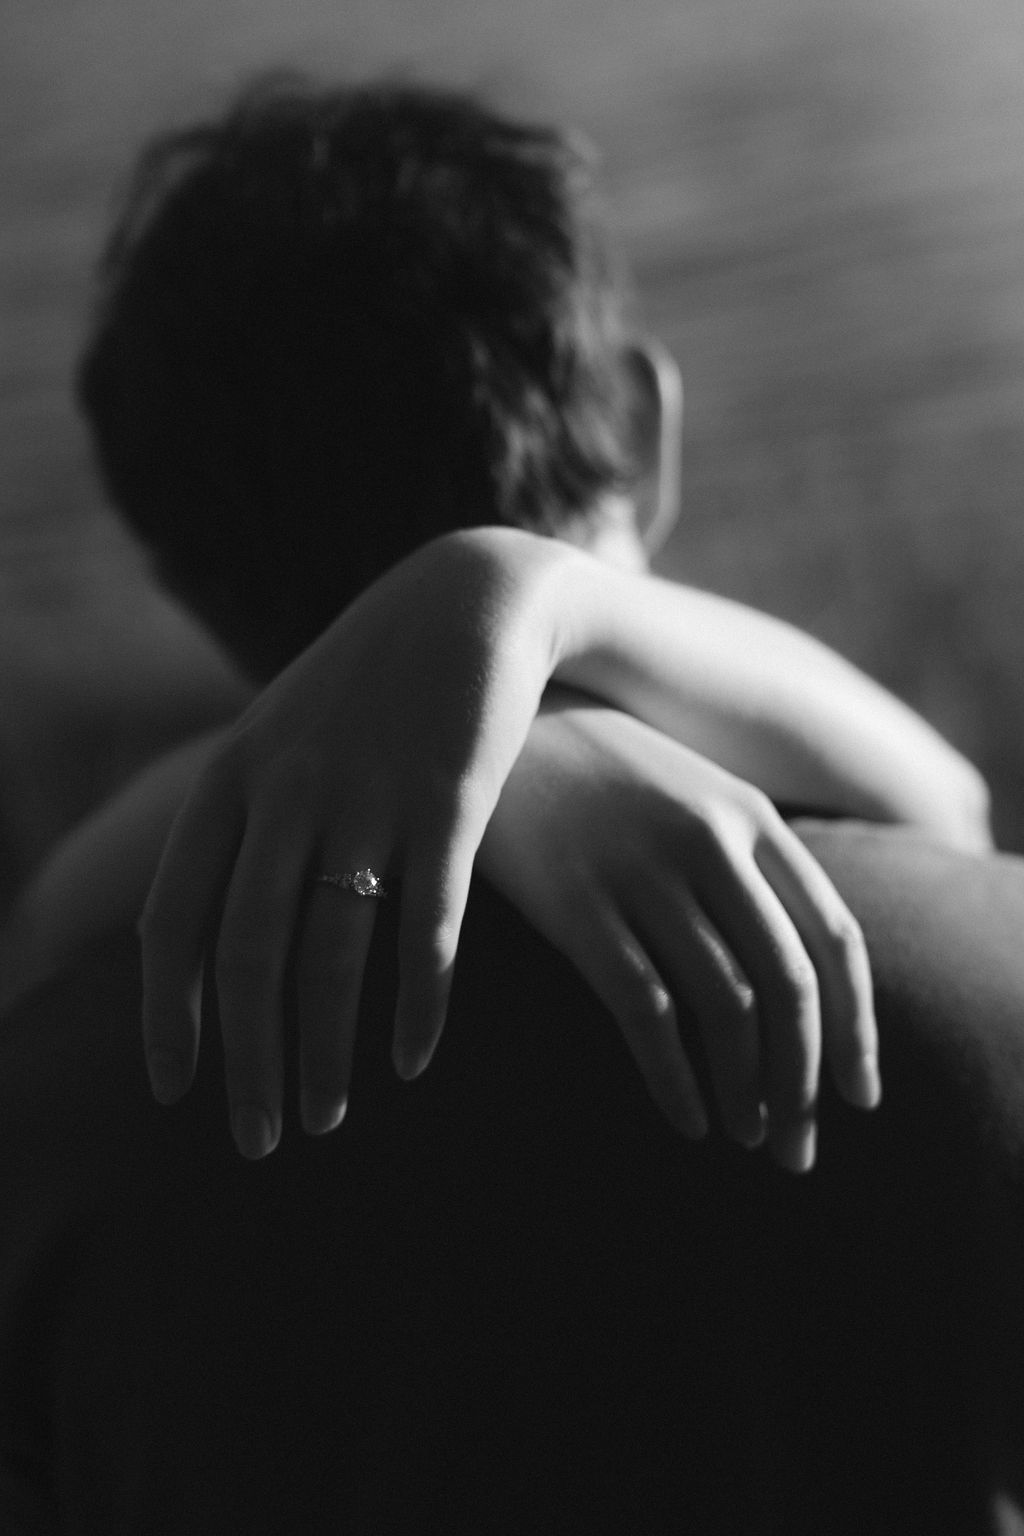 engagement shoot in black and white with engagement ring in the foreground